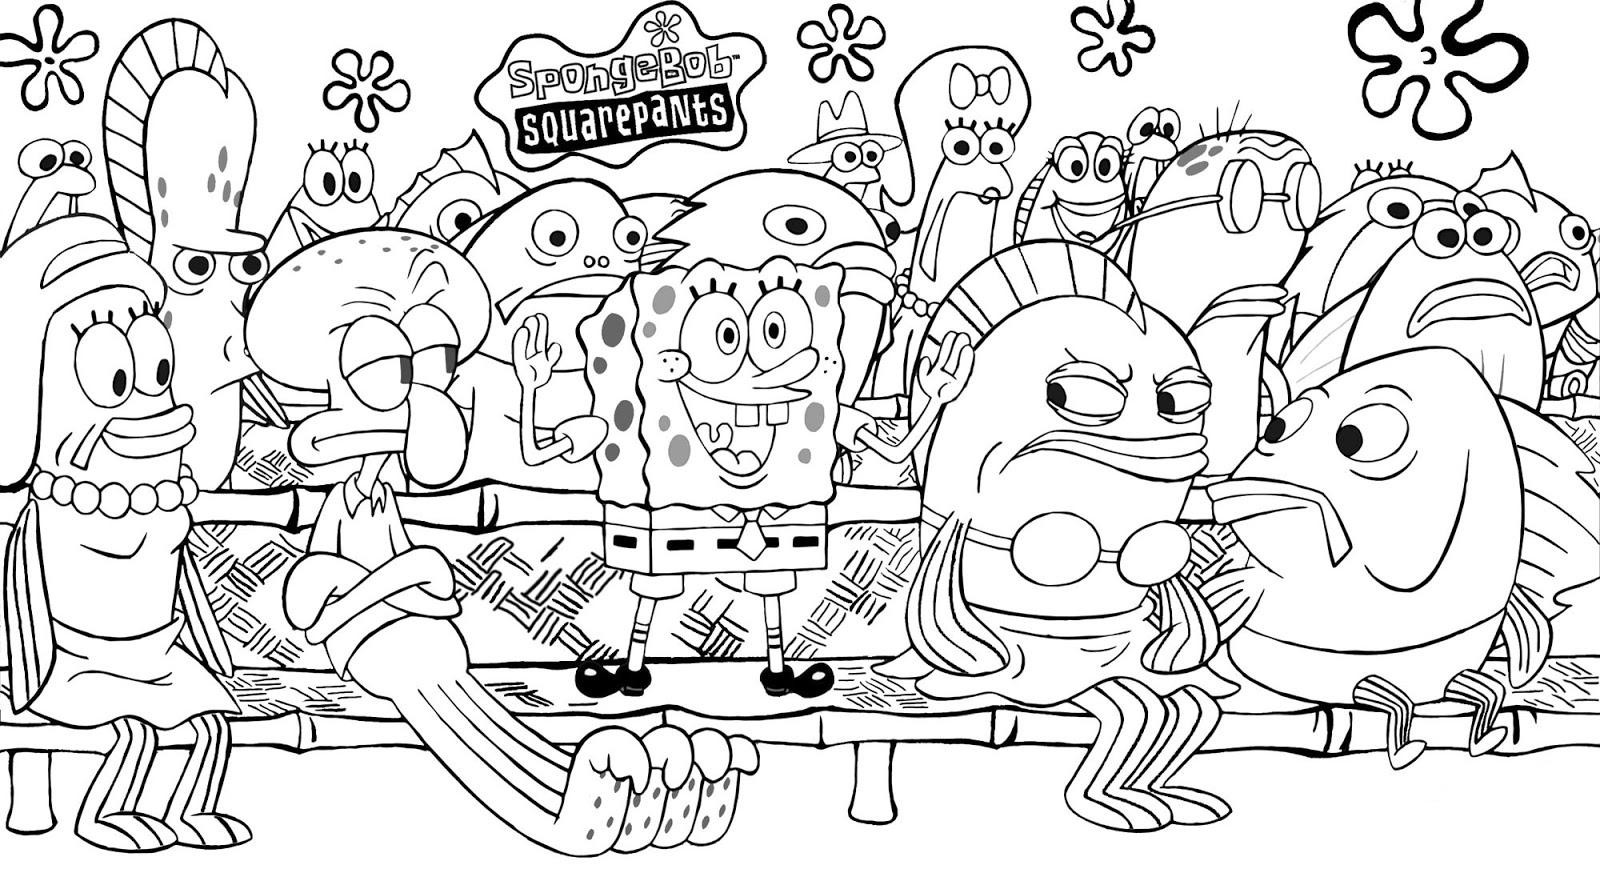 Spongebob Coloring Pages To Print 57 with Spongebob Coloring Pages To Print